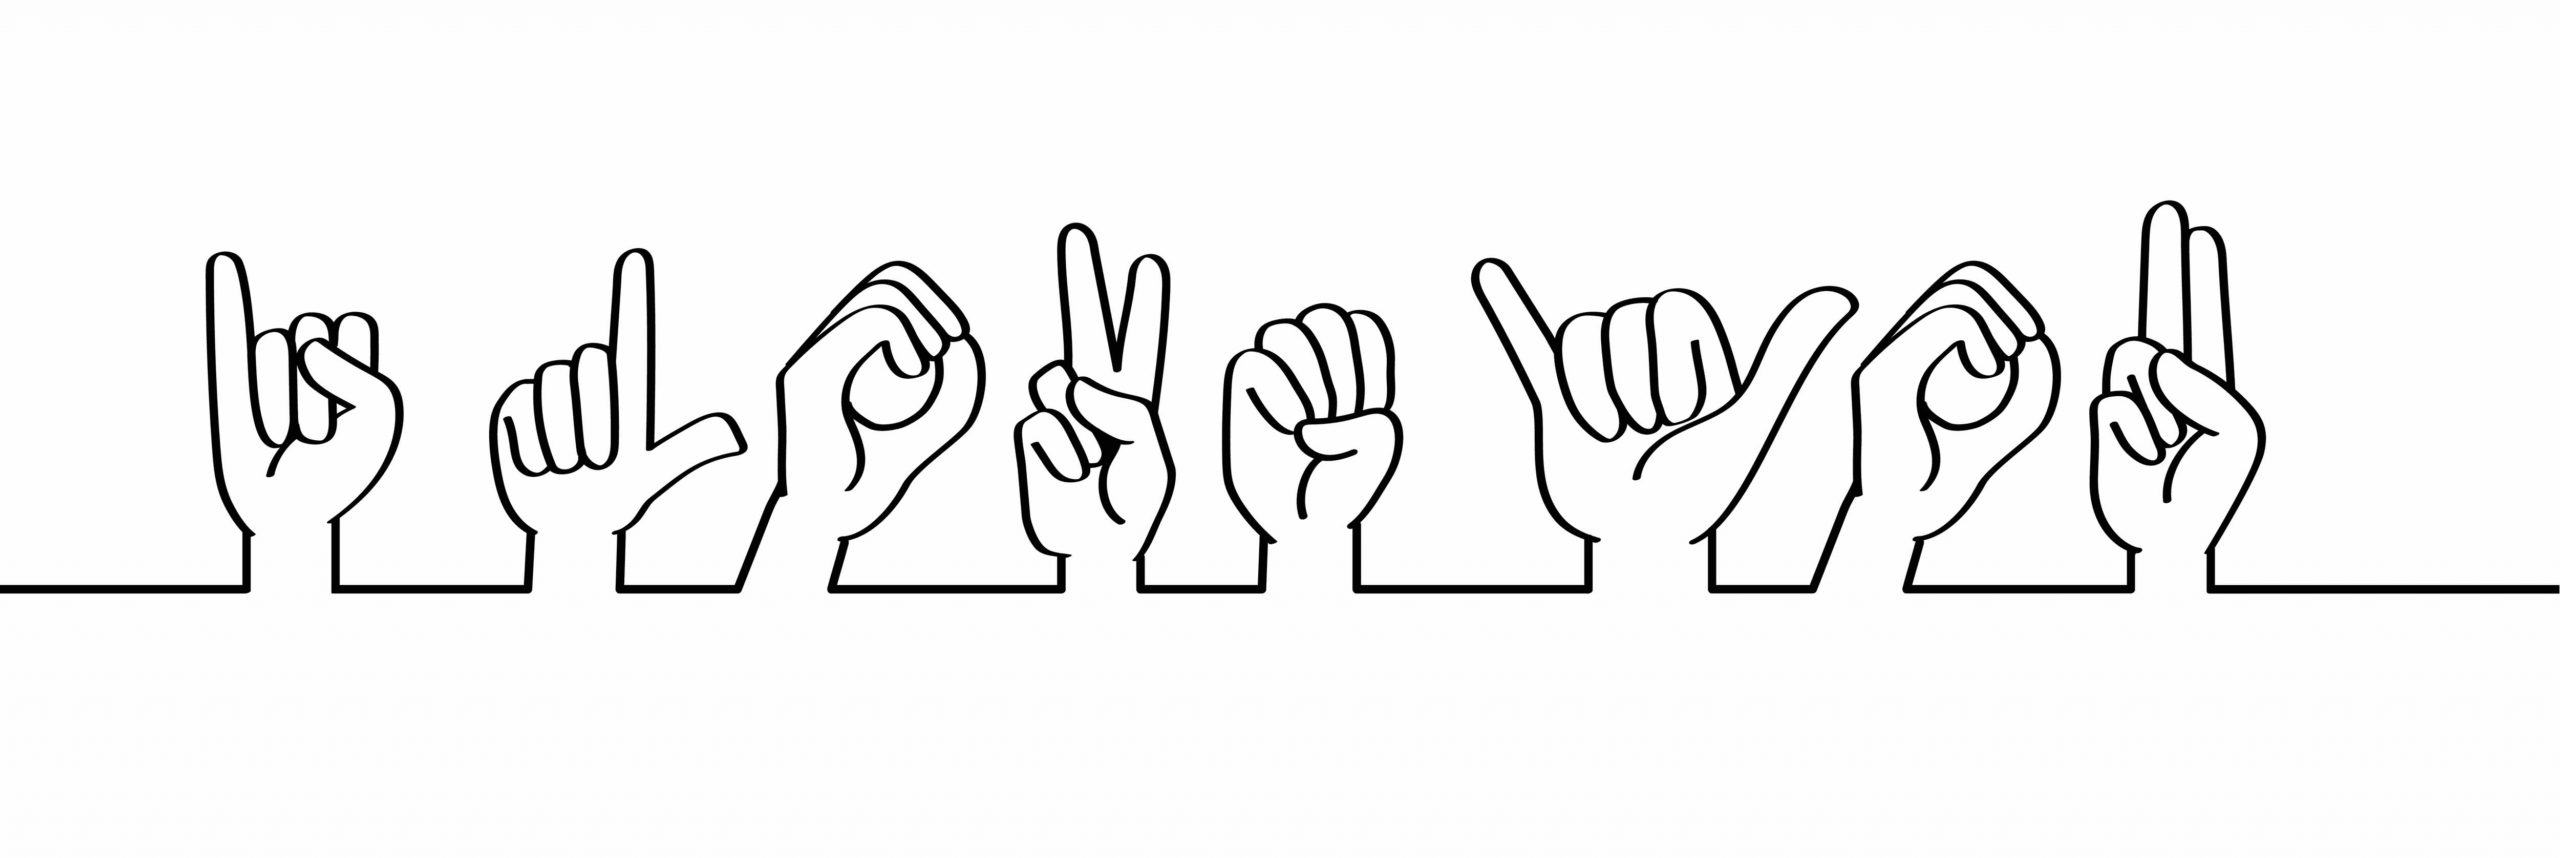 What is the sign language symbol for i love you?